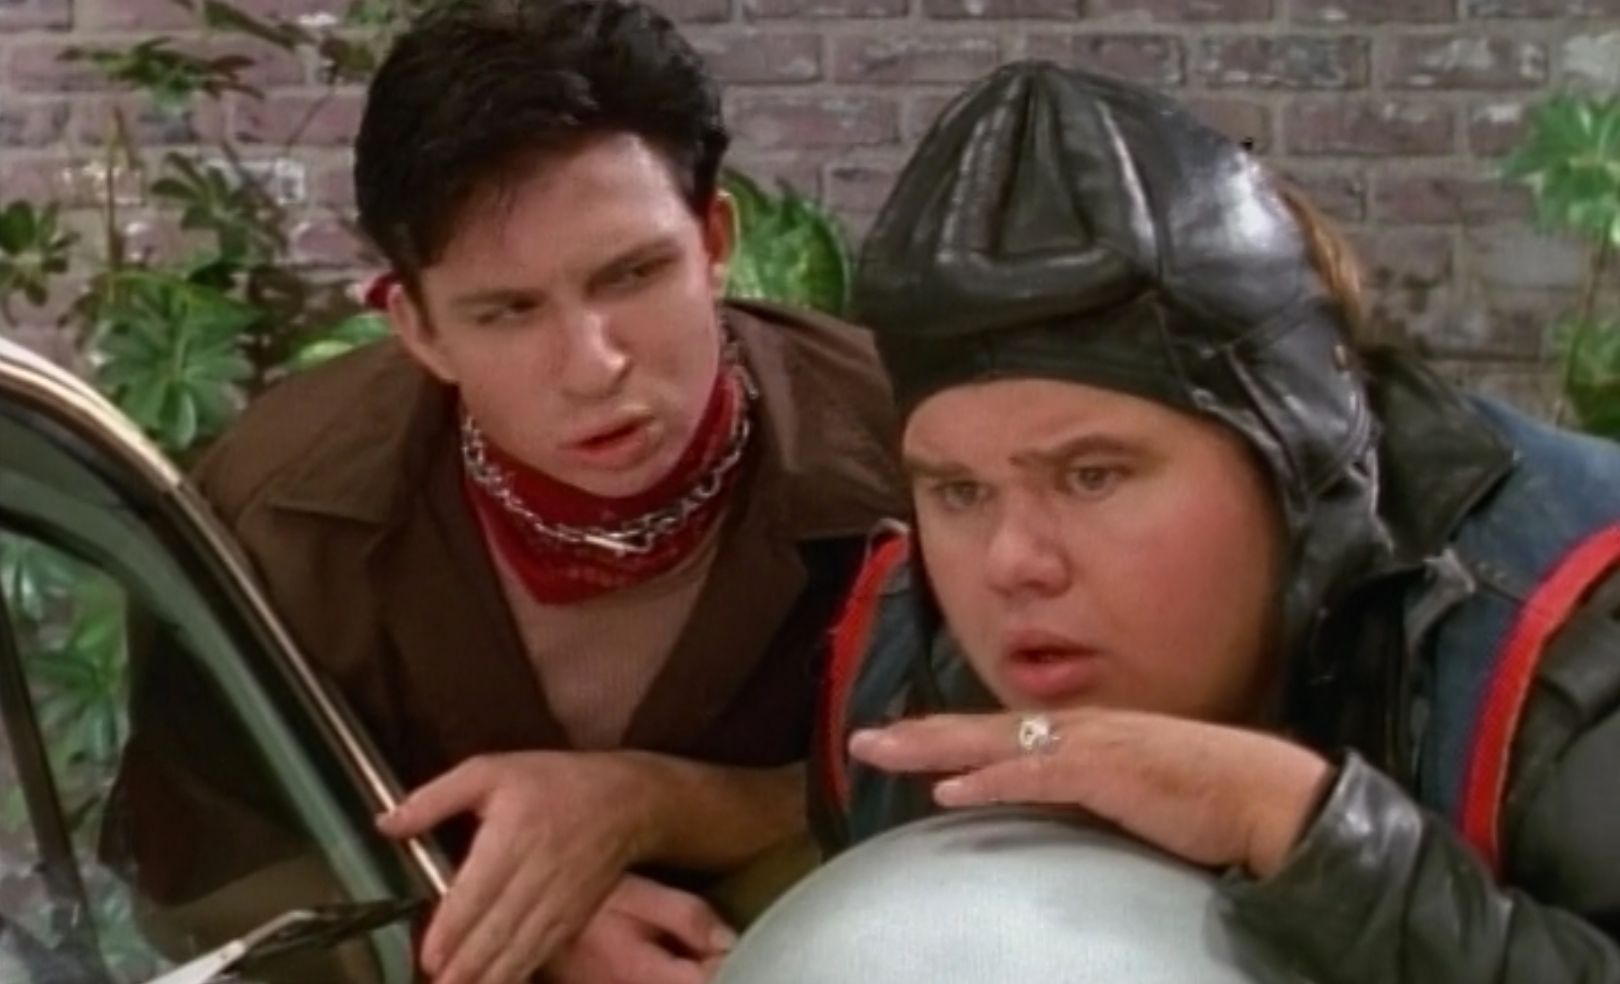 Bulk and Skull in Power Rangers Switching Places